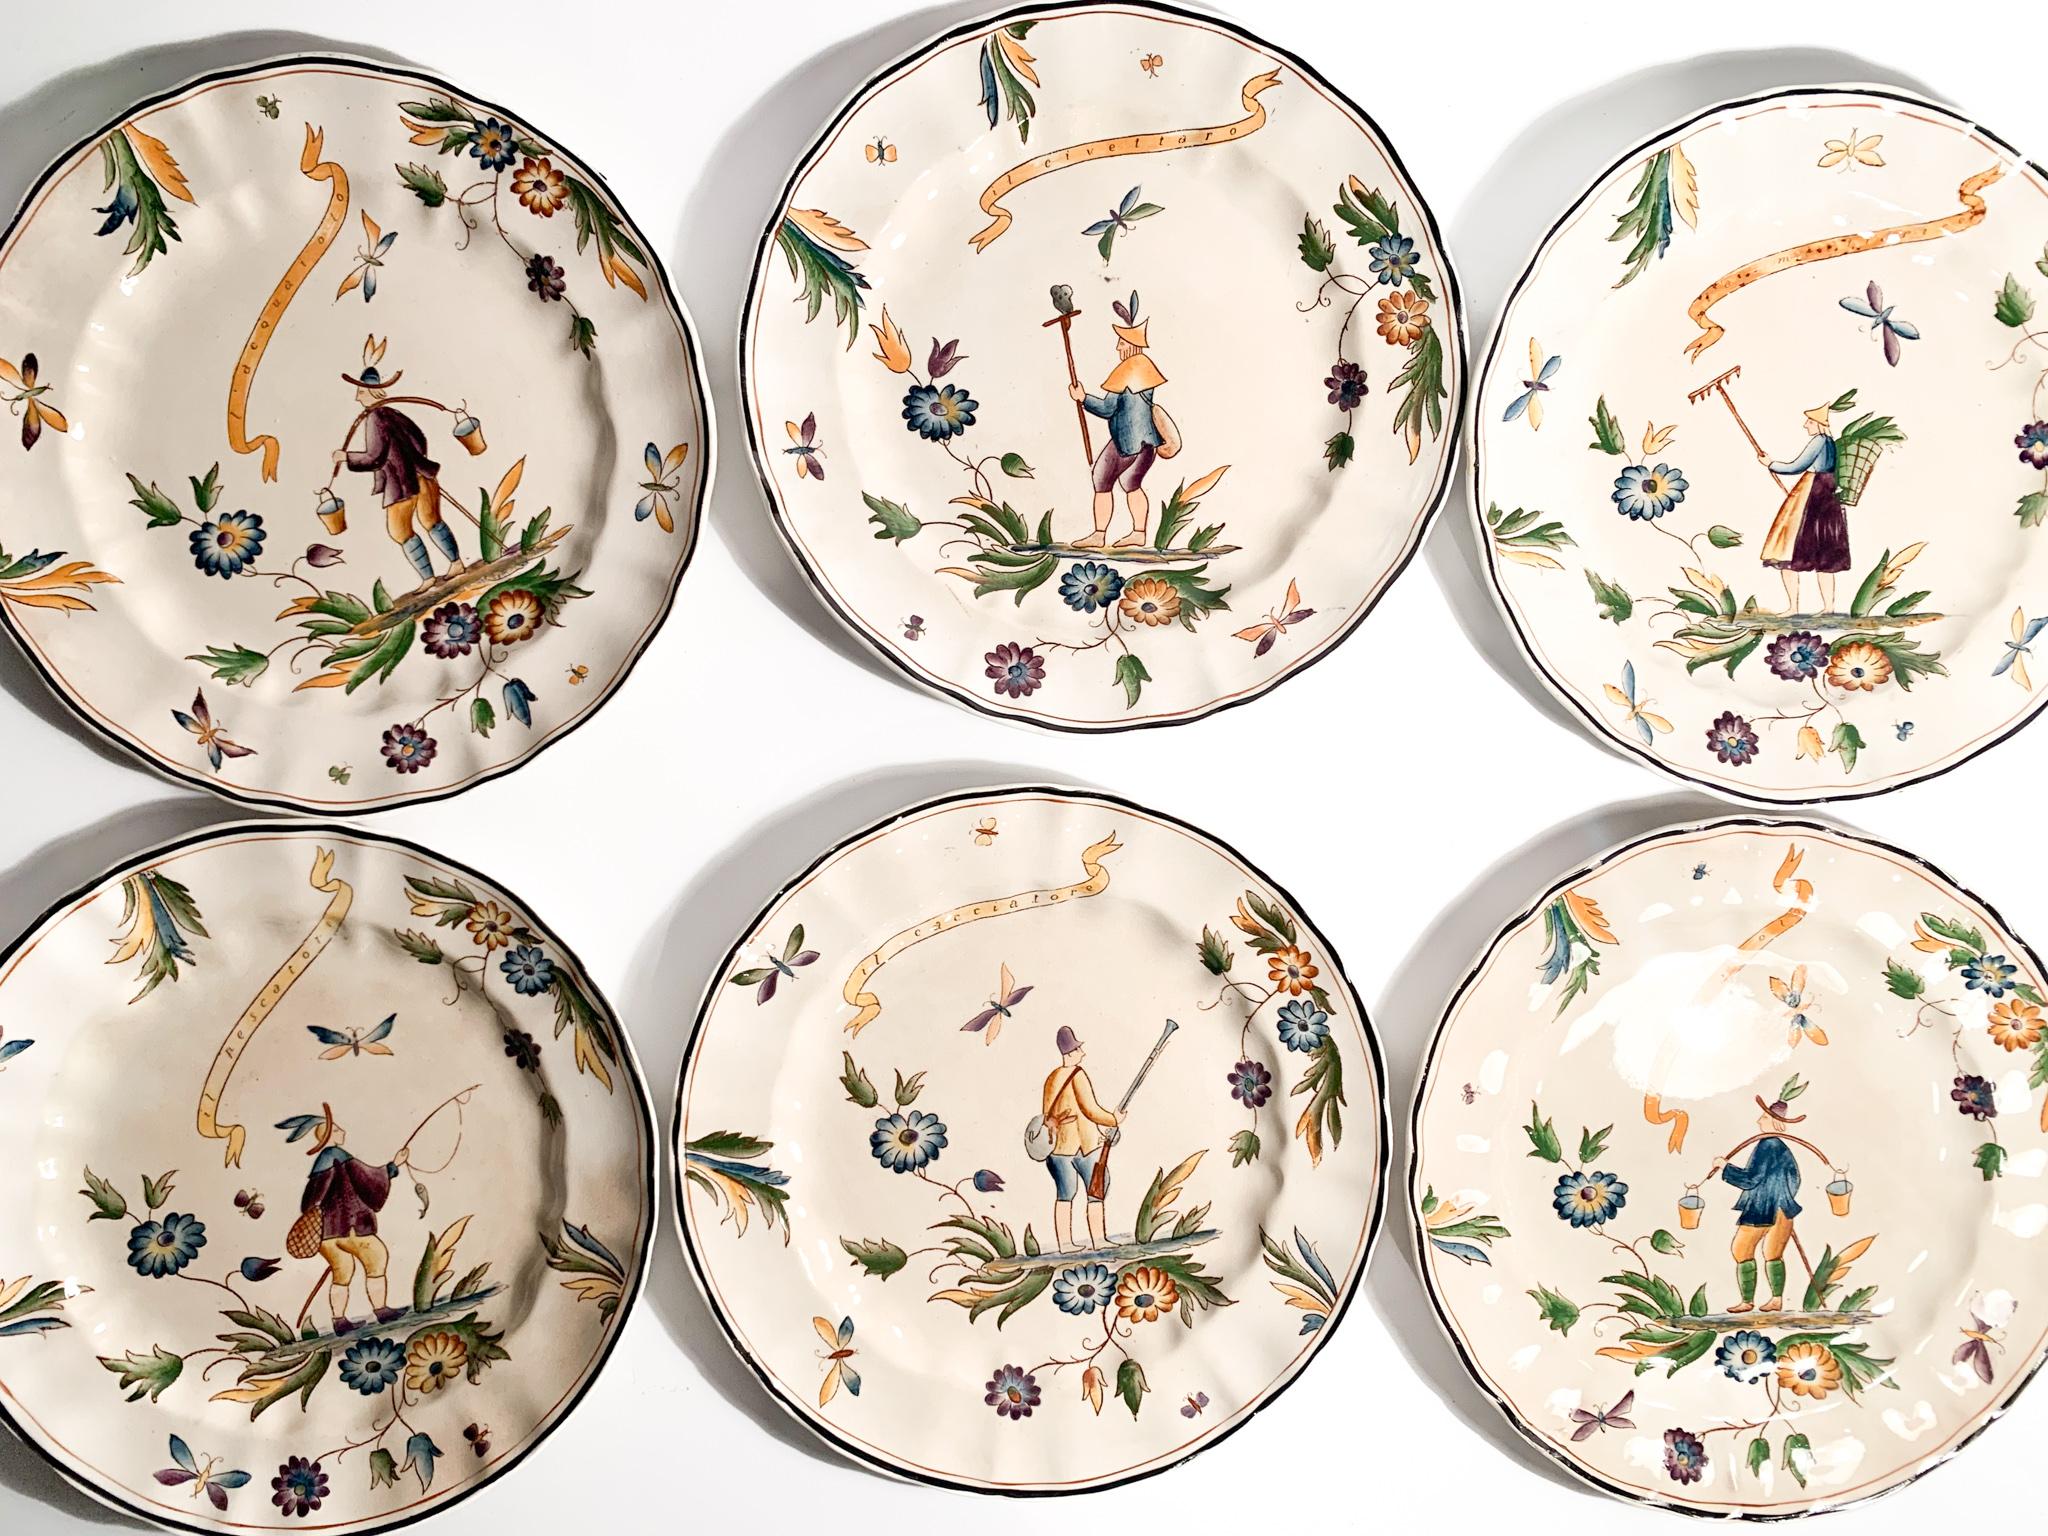 Set of six earthenware ceramic plates hand-painted in polychrome, Eroine collection created by Gio Ponti for Richard Ginori in the 1930s

The collection includes: the Owlster, the Harvester, the Waterseller, the Fisherman, the Hunter

Ø cm